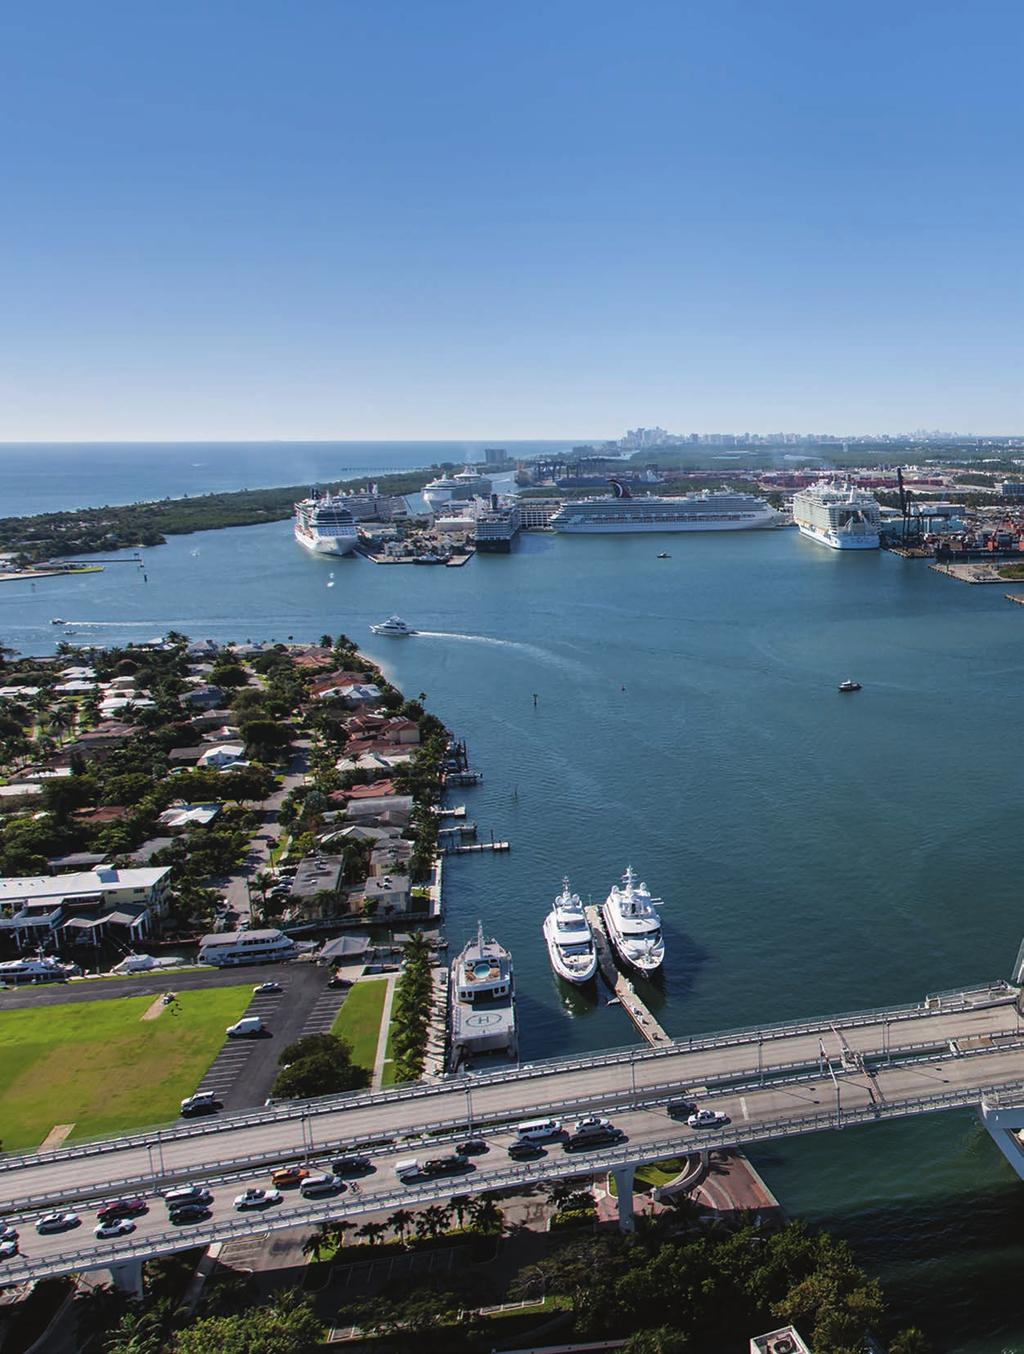 mission statement As a premier gateway and powerhouse for international trade, travel and investment, Broward County s Port Everglades leverages its world-class South Florida